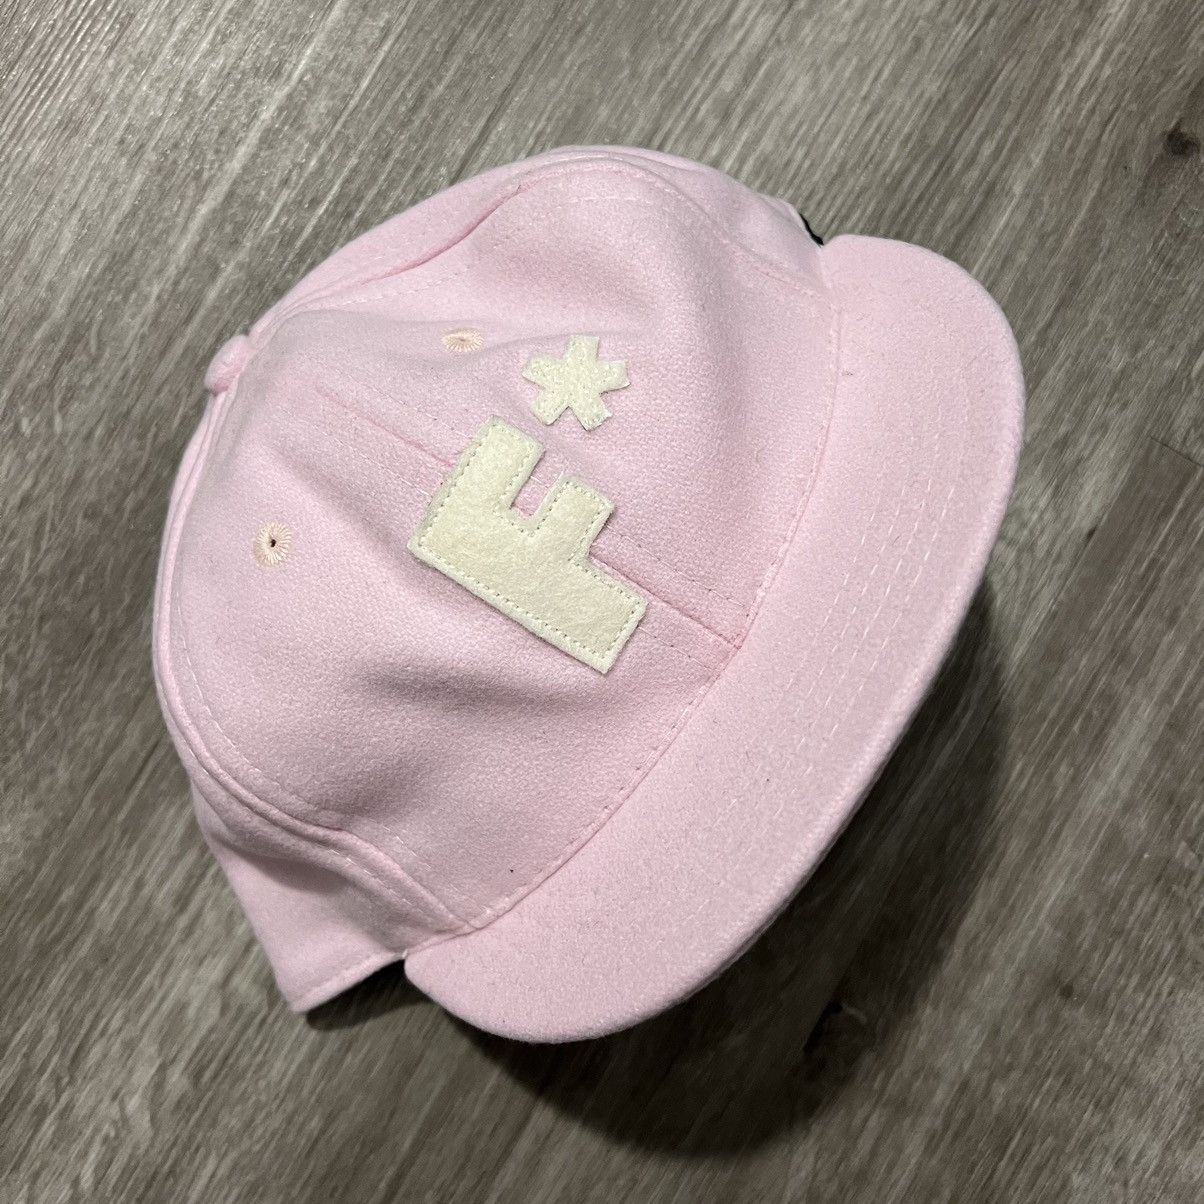 Pre-owned Golf Le Fleur X Golf Wang Golf Le Fleur F Fitted Cap 7 1/4 In Pink